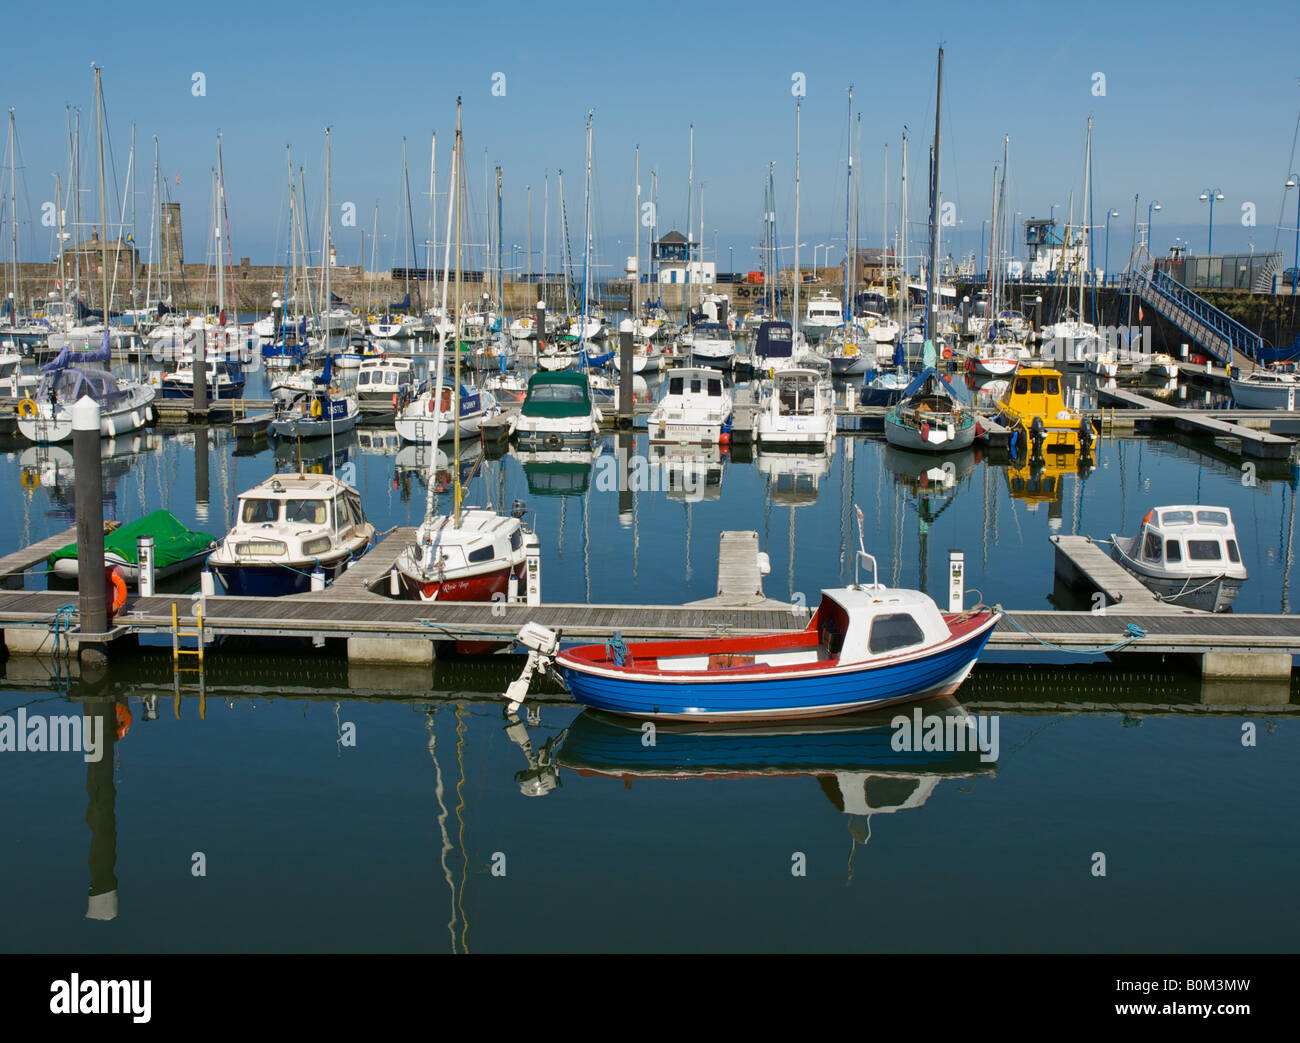 The harbour and marina at the port of Whitehaven, Cumbria, England UK ...